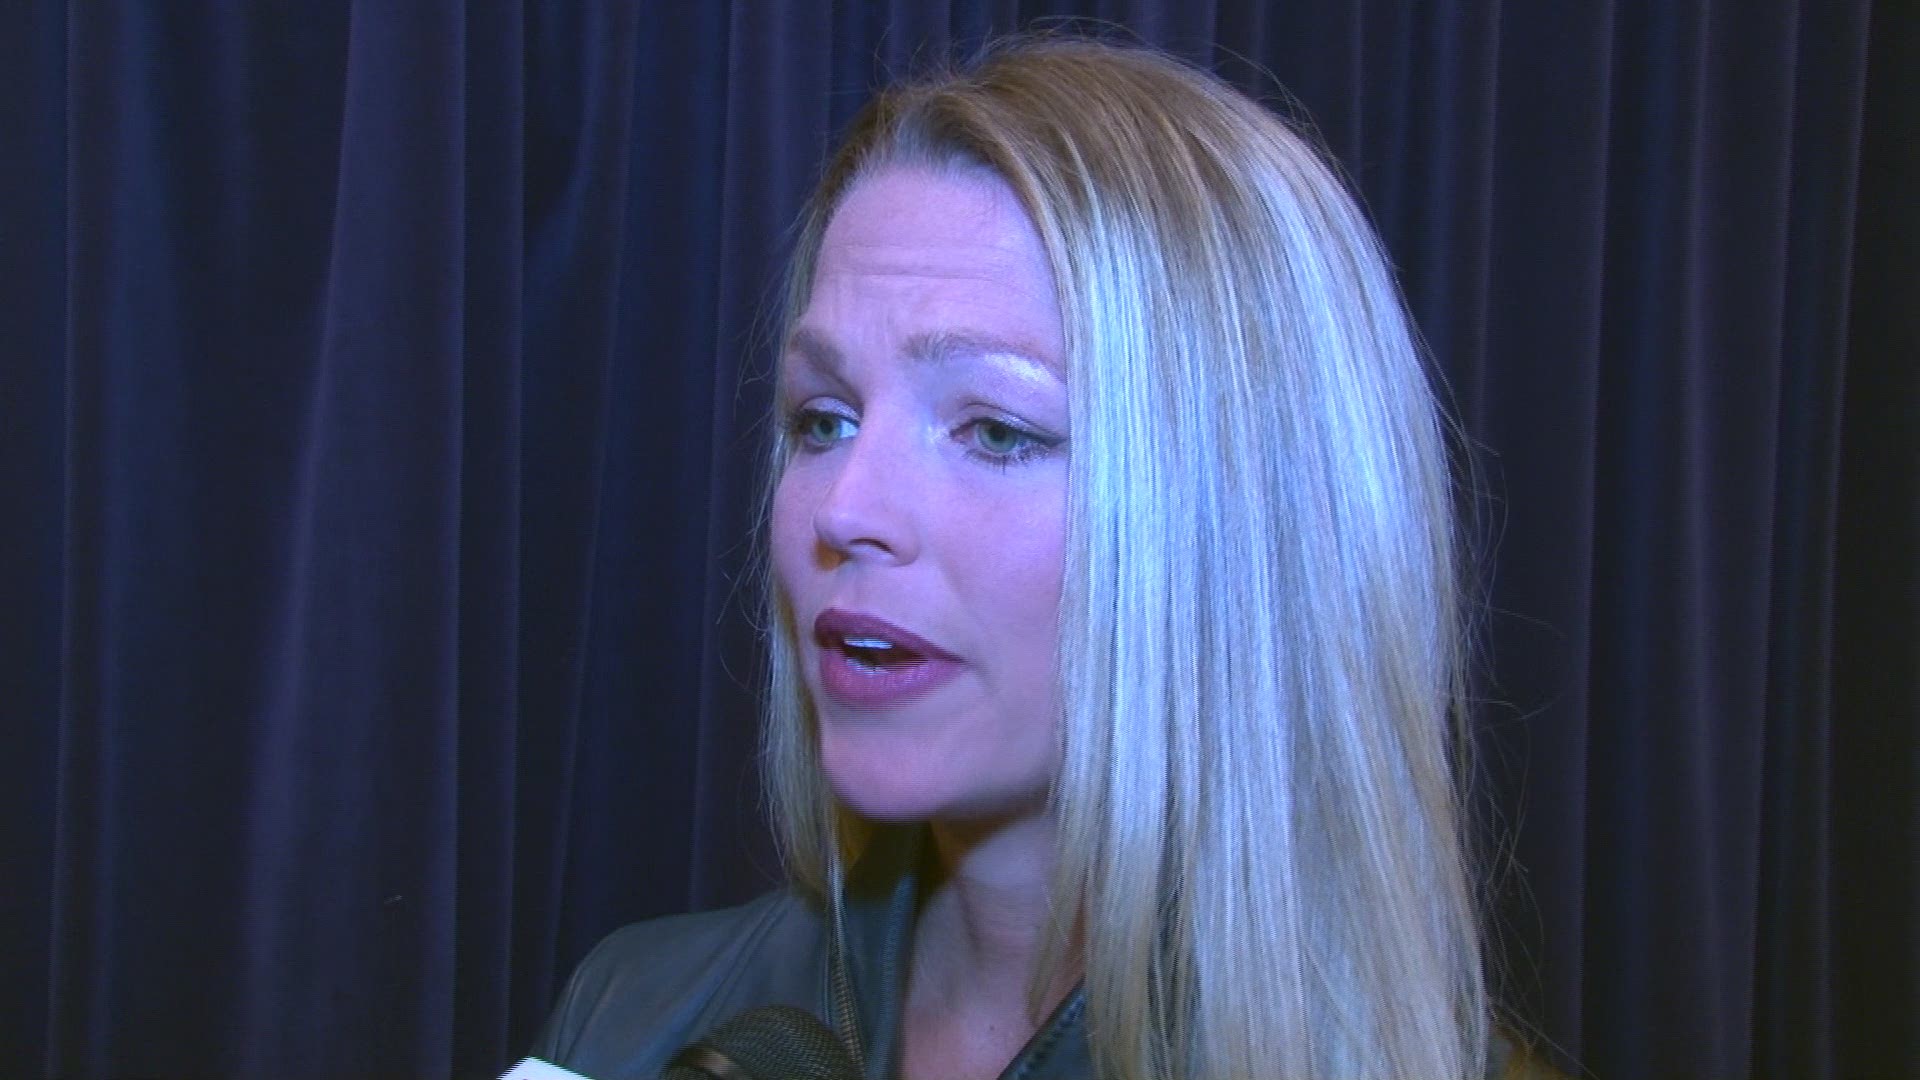 She's the sideline reporter for college football on CBS, but this time of year, Allie Laforce is courtside for the NCAA Tournament. News19 talked to Laforce at Madison Square Garden where USC will face Baylor Friday night.